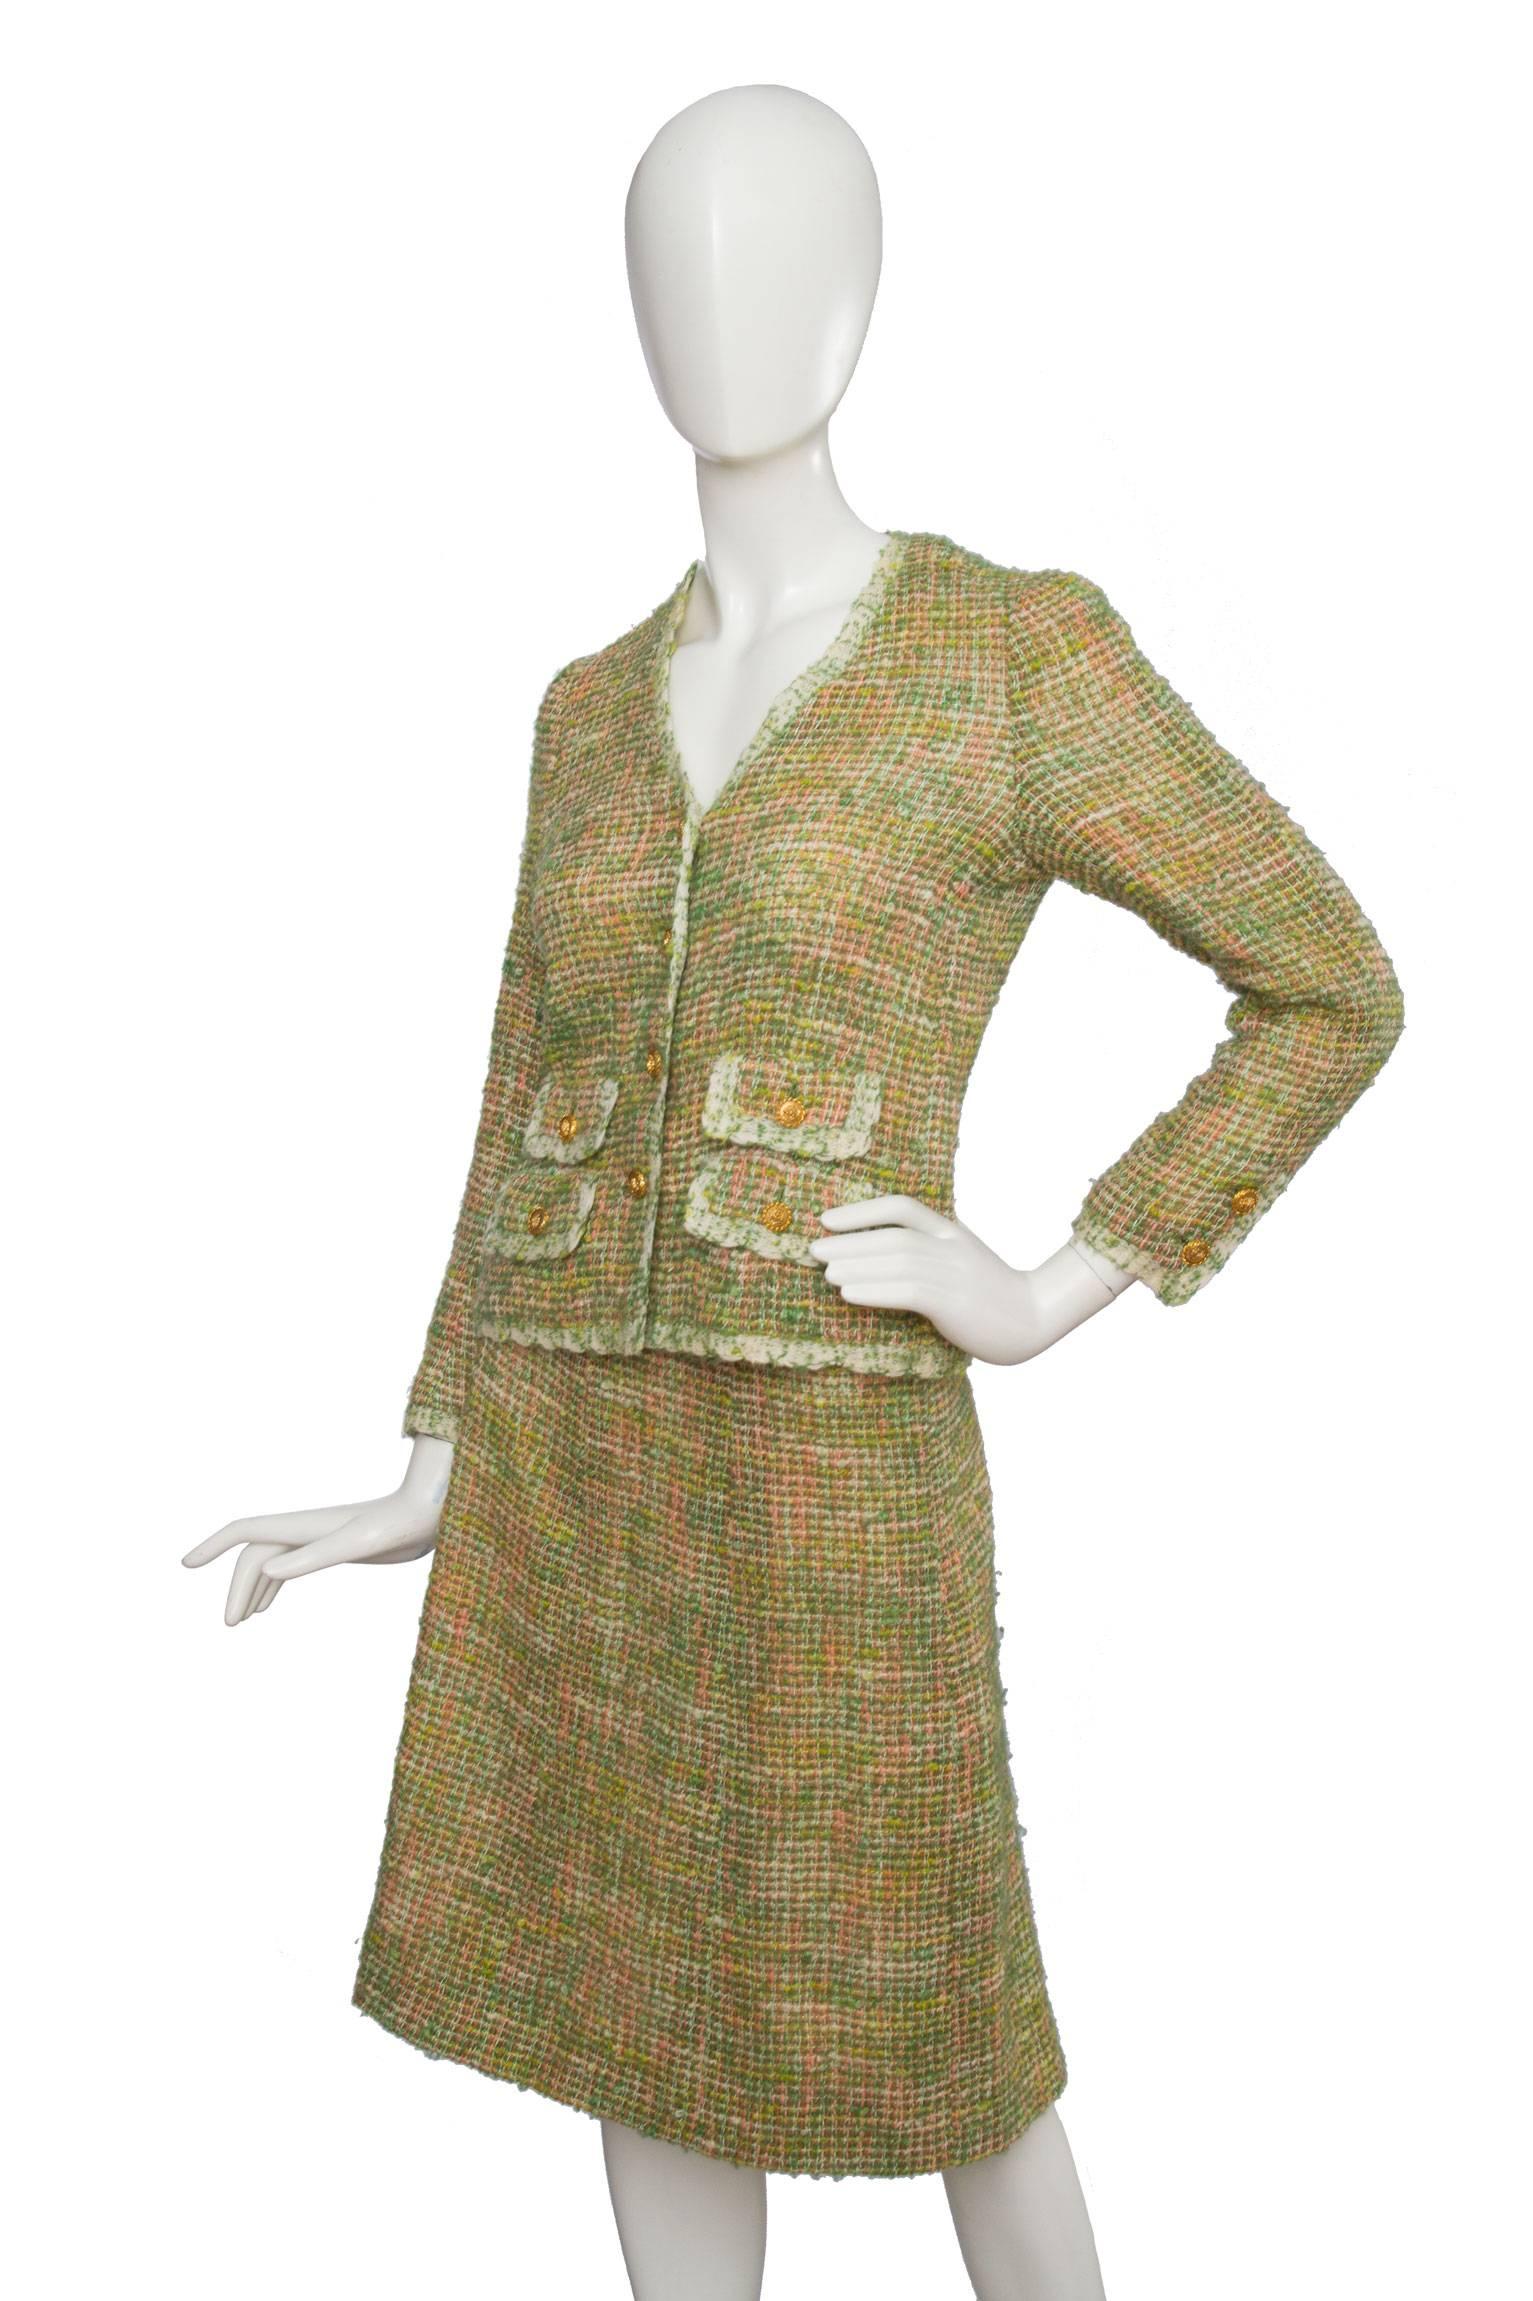 A light green 1960s Chanel haute couture  skirt suit with light pink accents consisting of an a-line skirt and a fitted front buttoned jacket. The jacket has a deep v-neckline and four mock flap pockets on the front. The skirt has a back zipper and